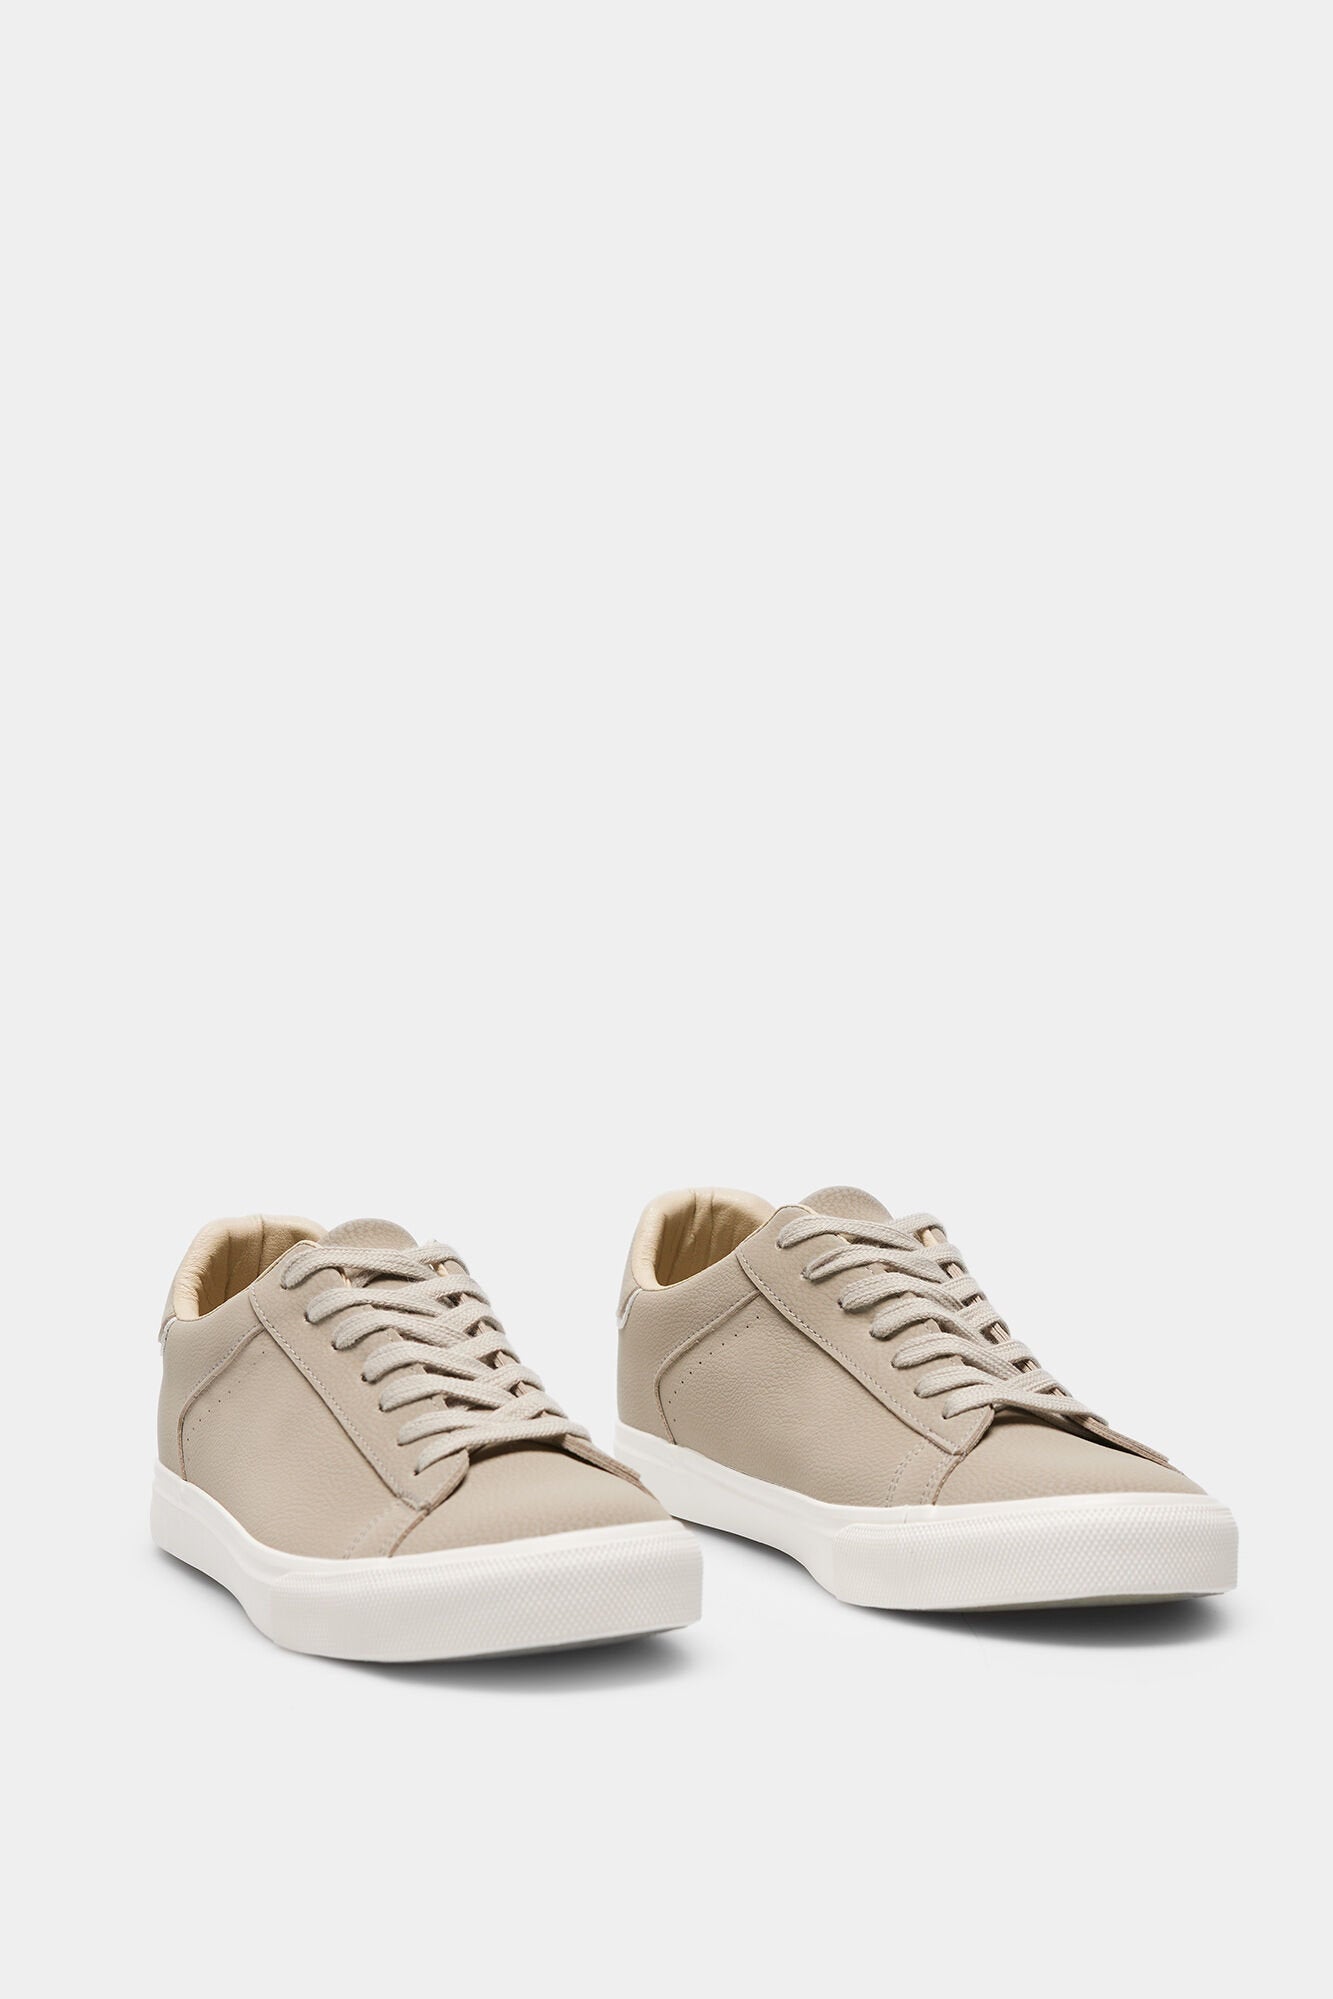 Beige Lace Up Trainers With White Sole_2997584_41_03